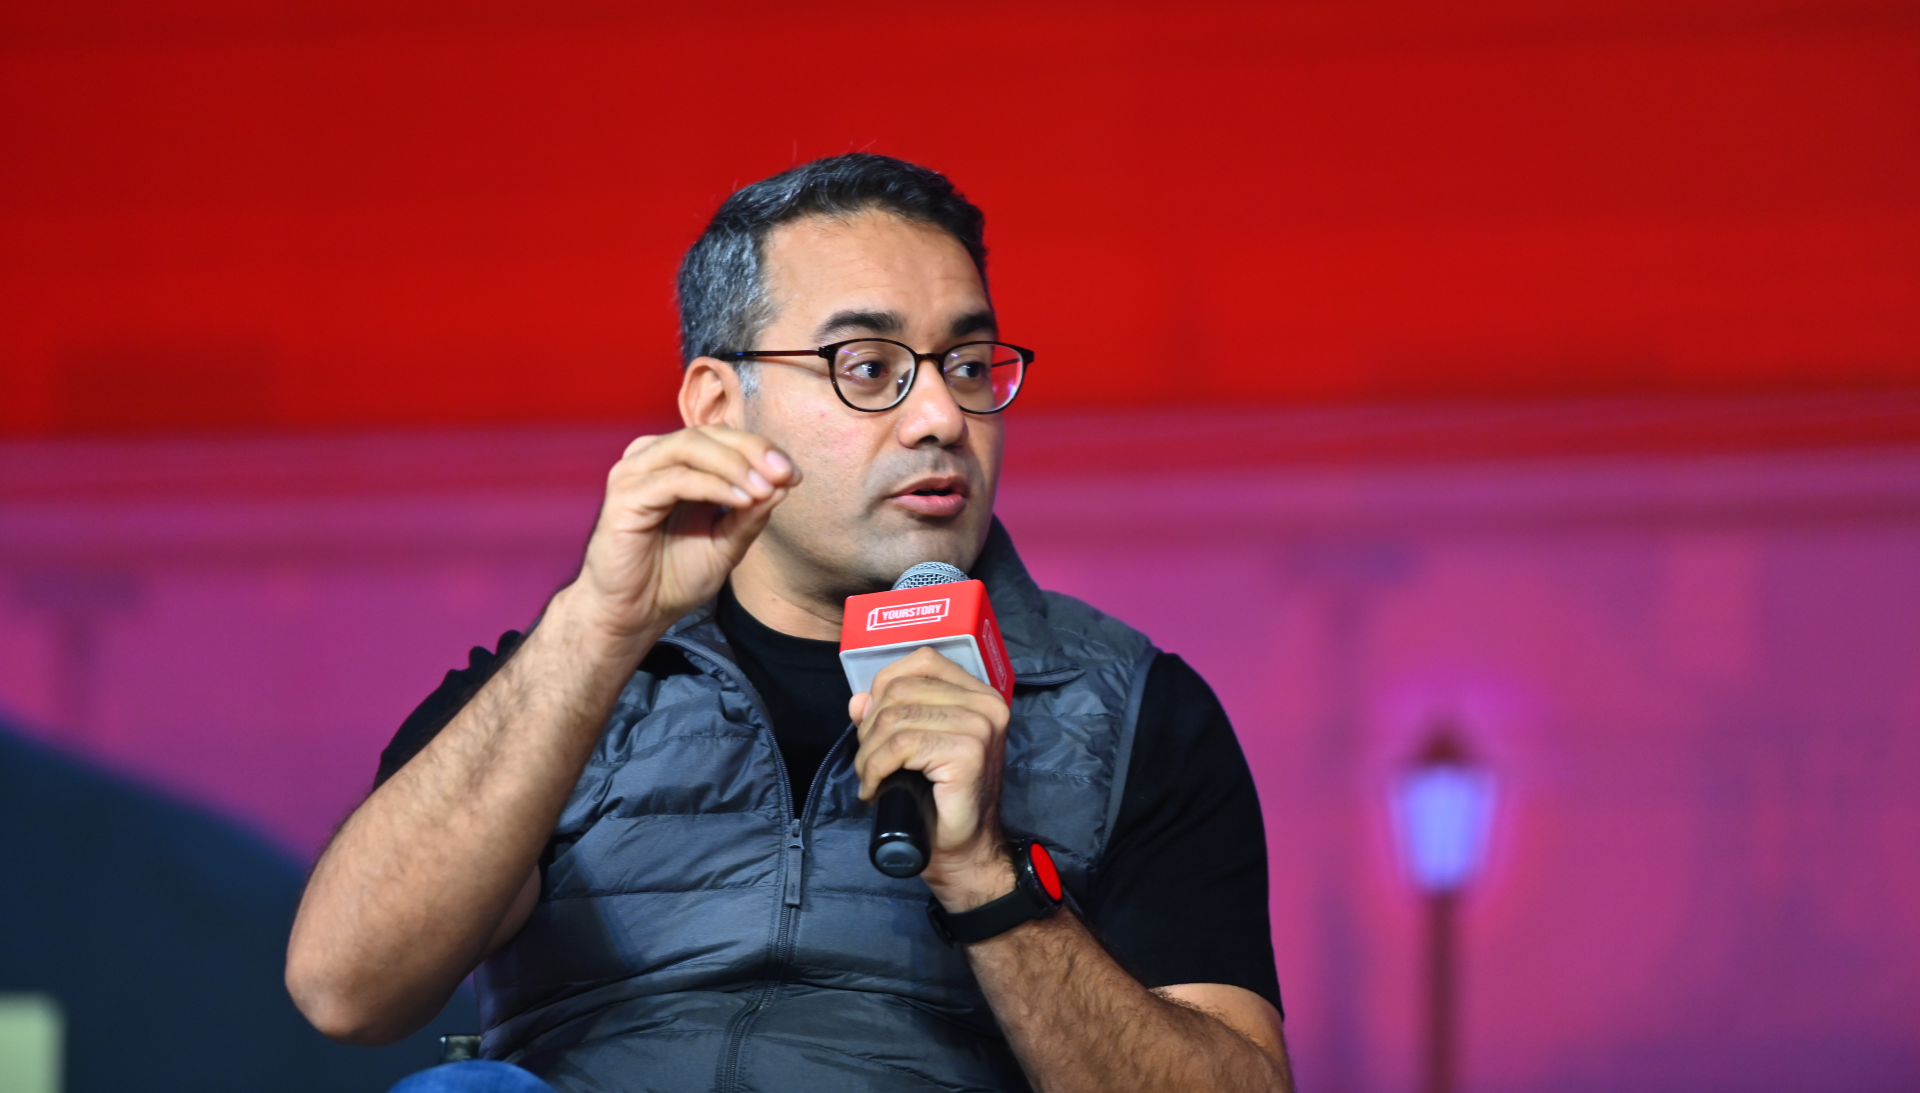 Learnings from building Snapdeal, ‘Indicorns’, and work culture: top lessons from Kunal Bahl 